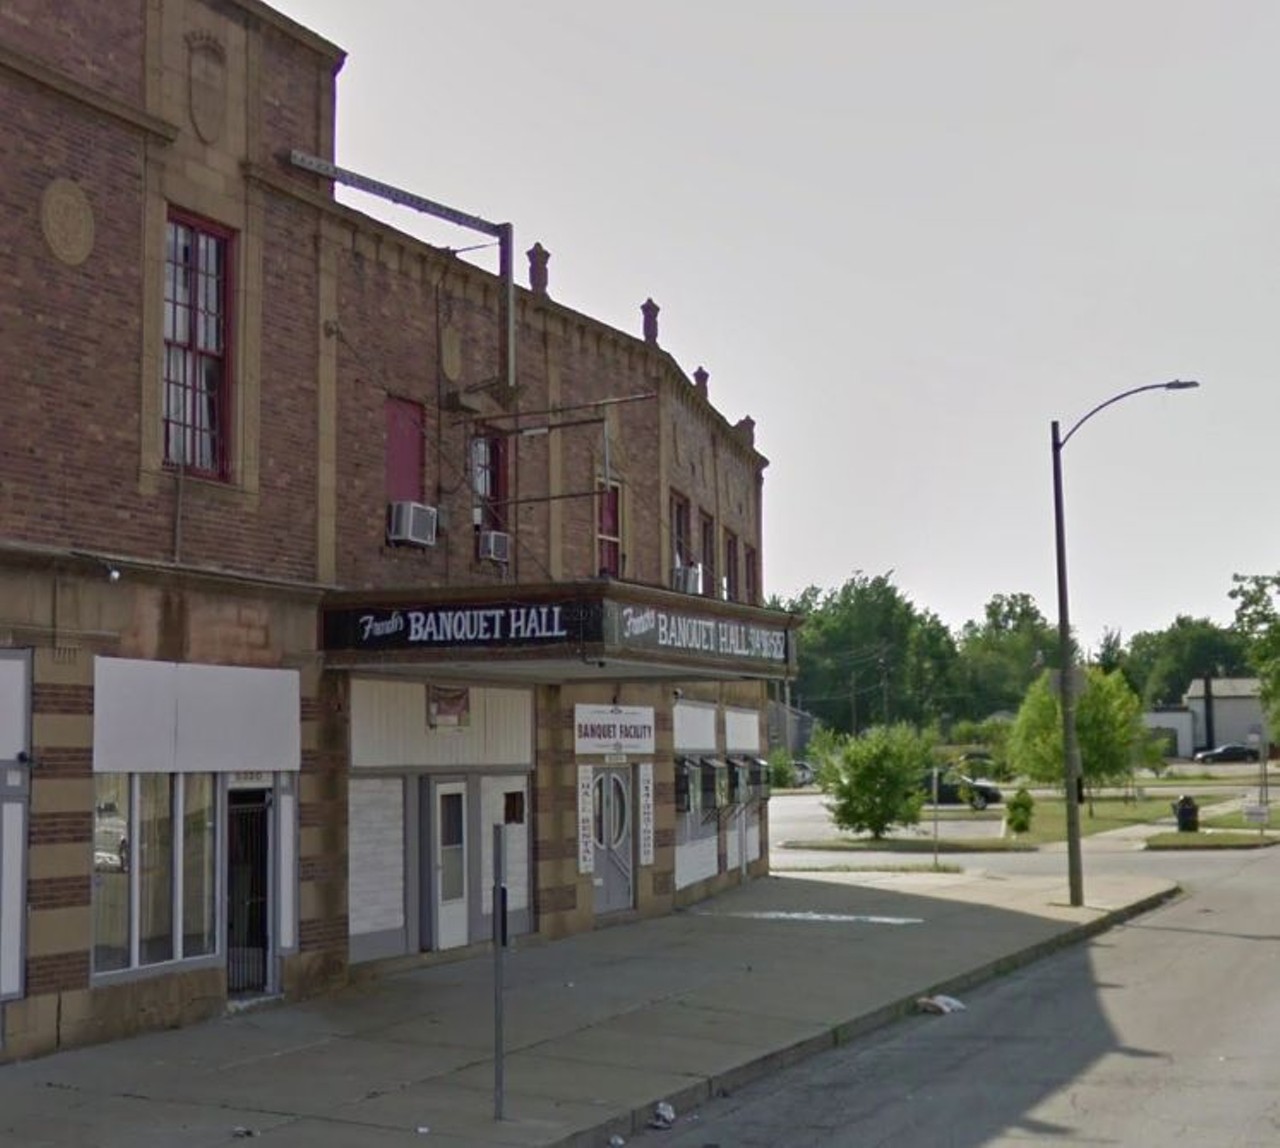 When Pace ended up doing nothing with the building, it went back to the city. The ward's alderwoman would now like to see a sit-down restaurant. Shown here: Club Imperial in July 2017. Image via Google Maps.